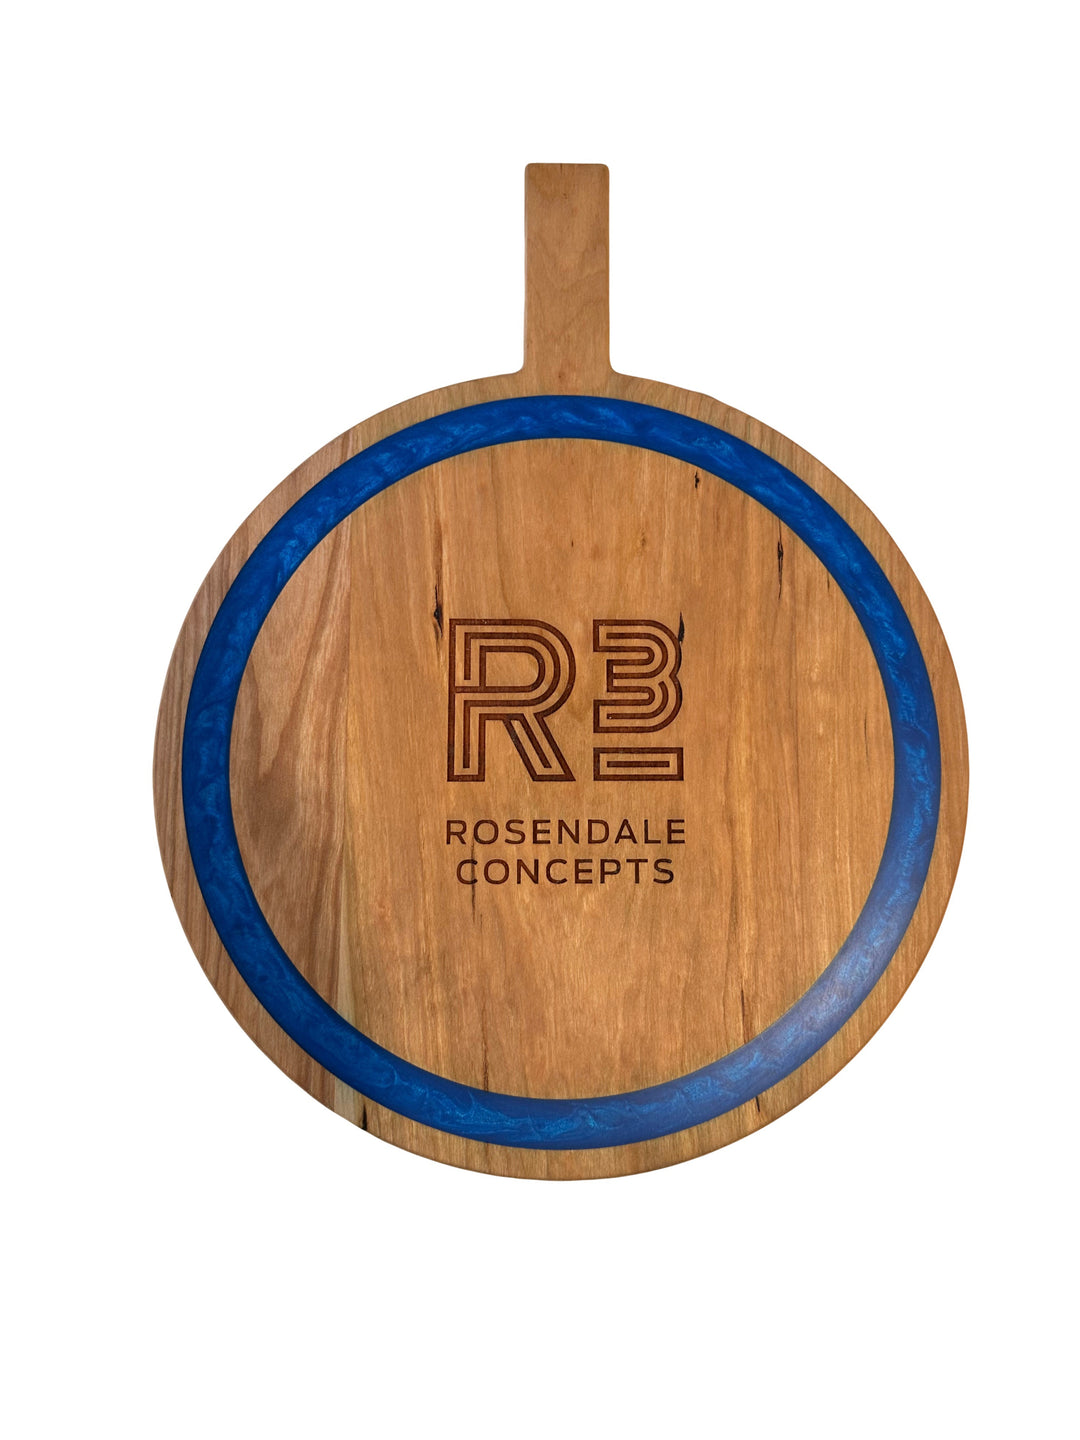 R3 Serving Boards - Cherry Wood with Blue Epoxy